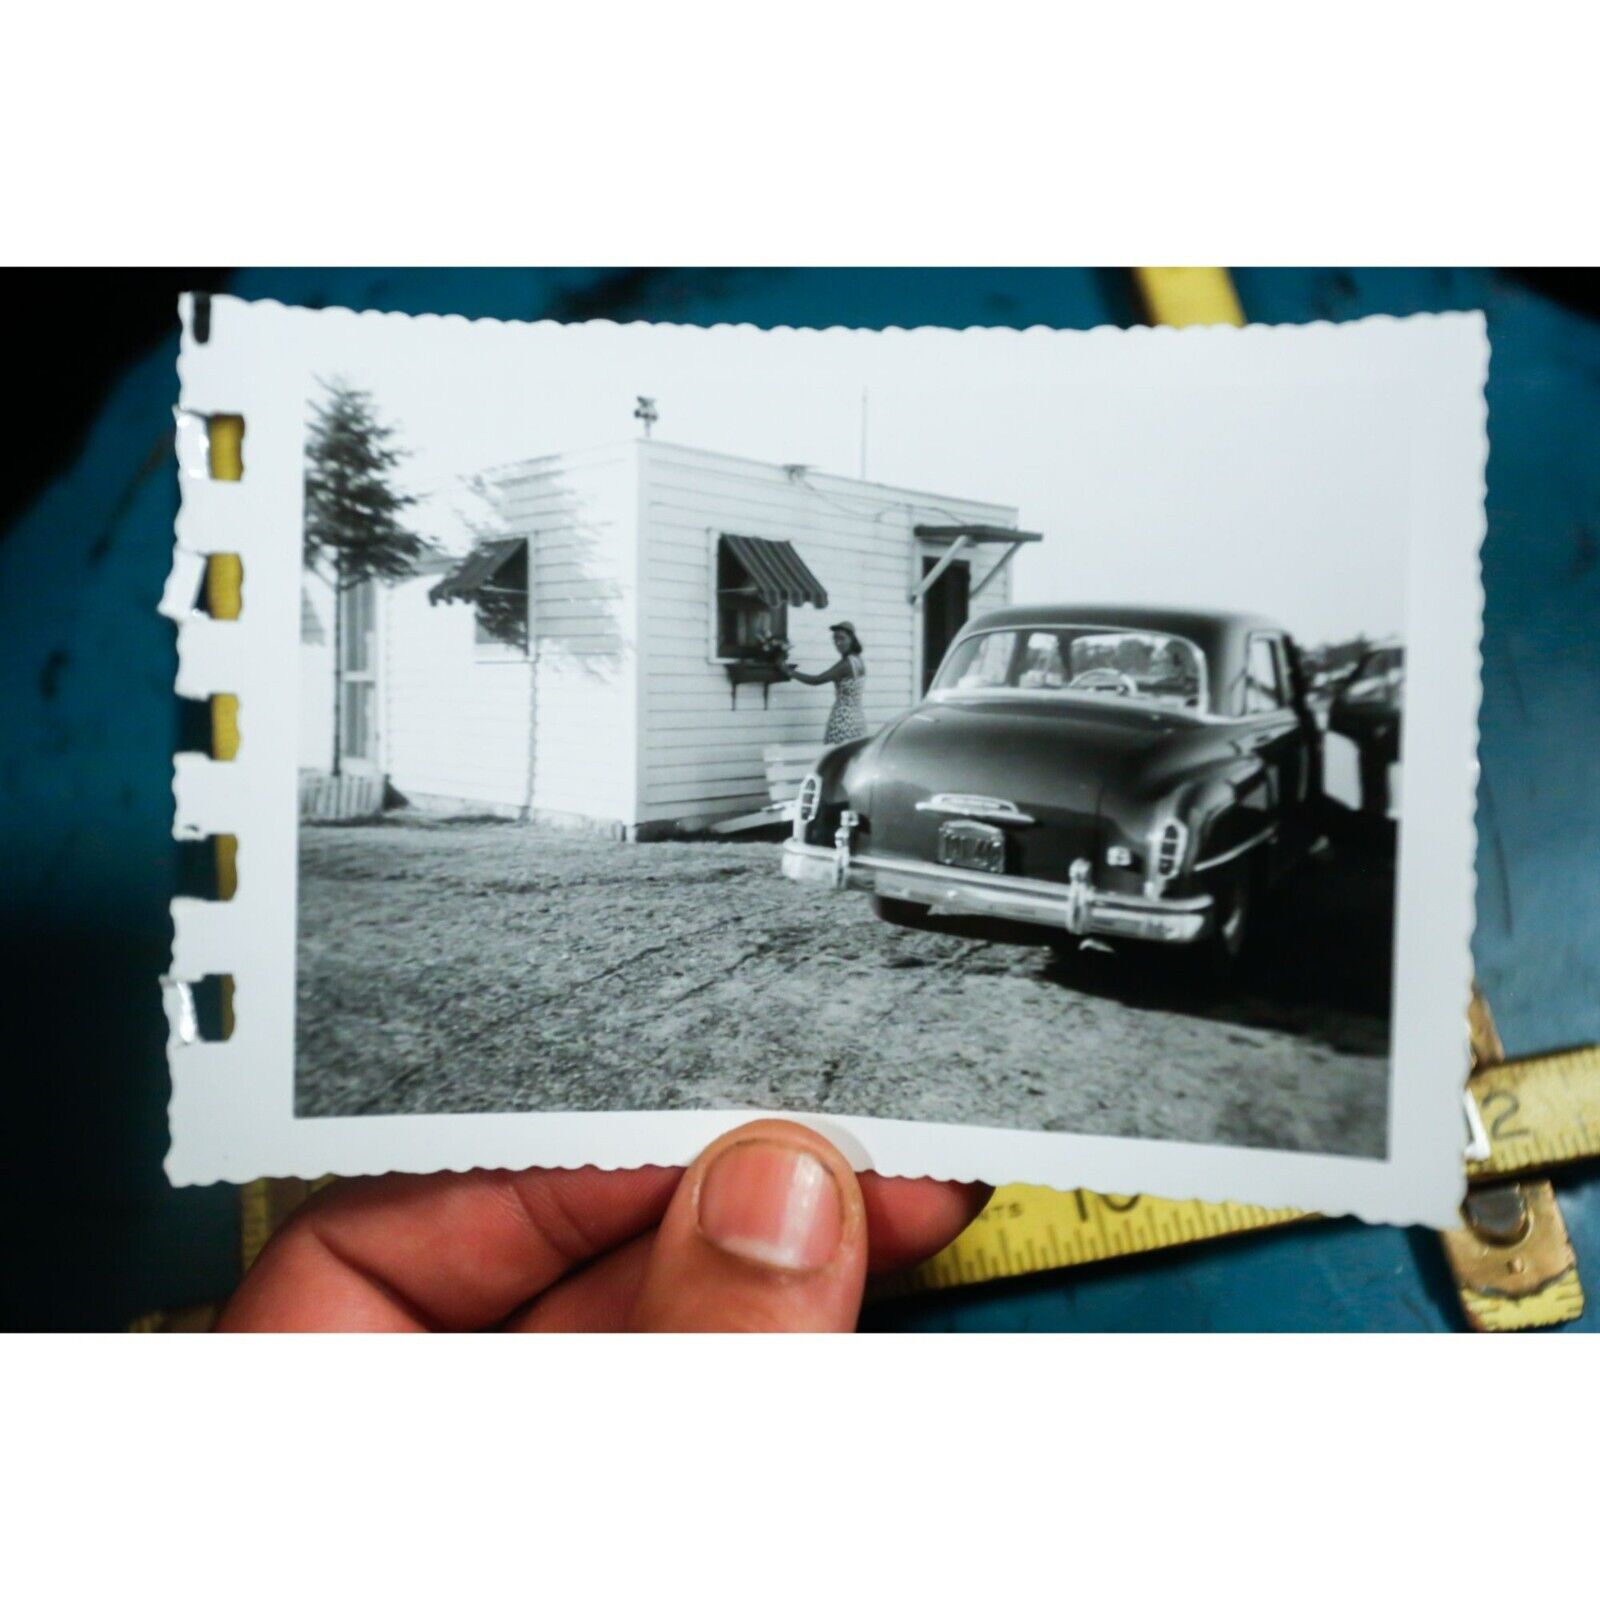 American Dream Attractive Woman Fixing Plant Nice Old Car Vintage Snapshot Photo